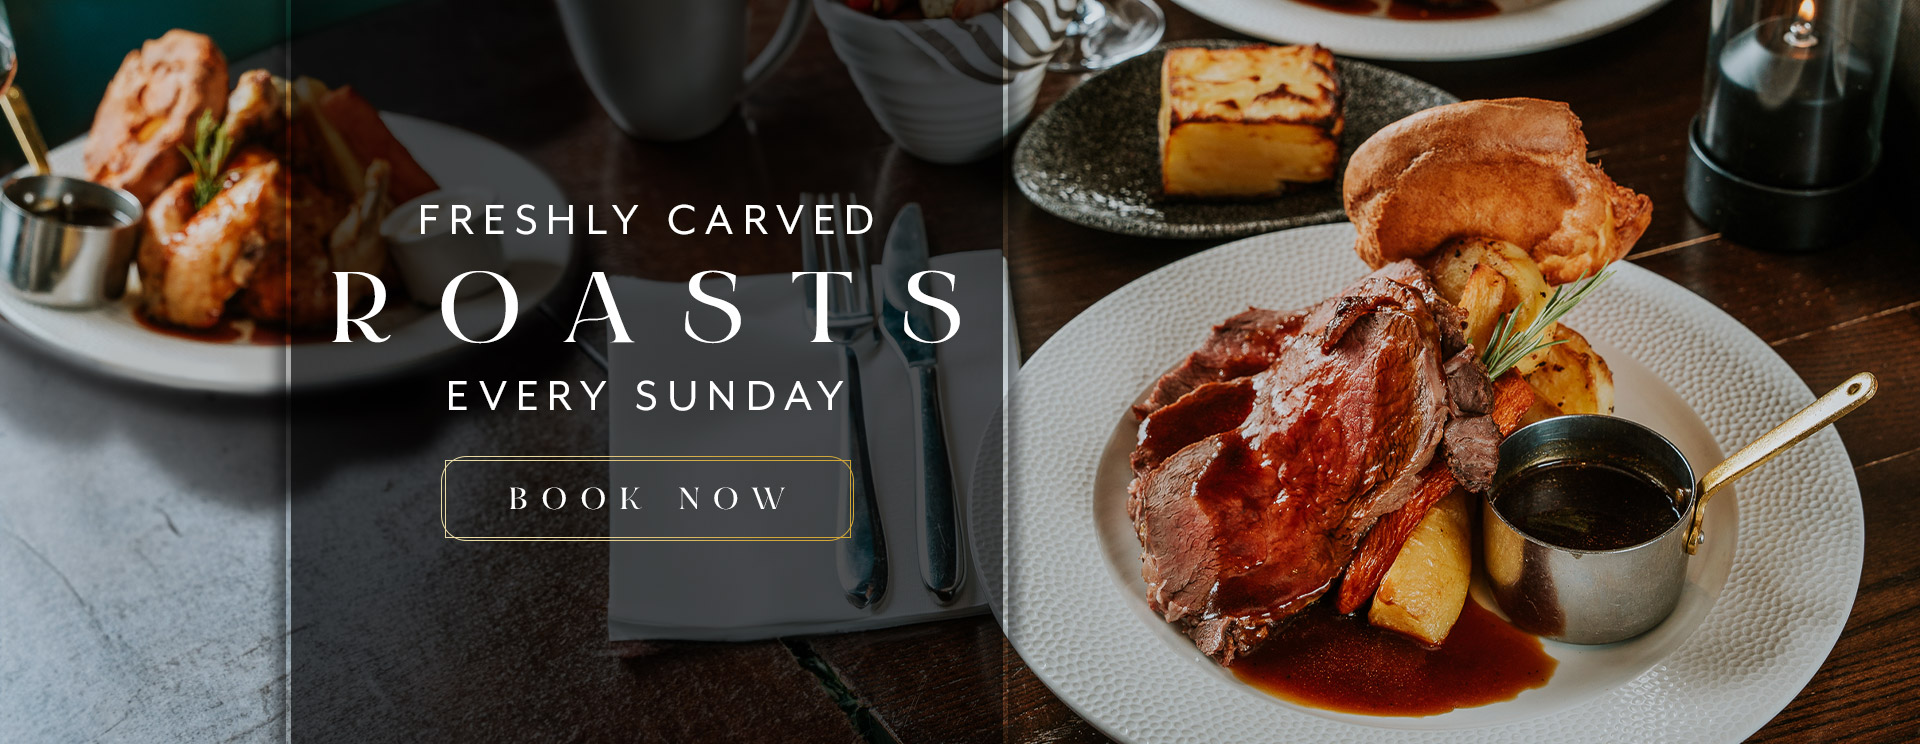 Sunday Lunch at The White Hart